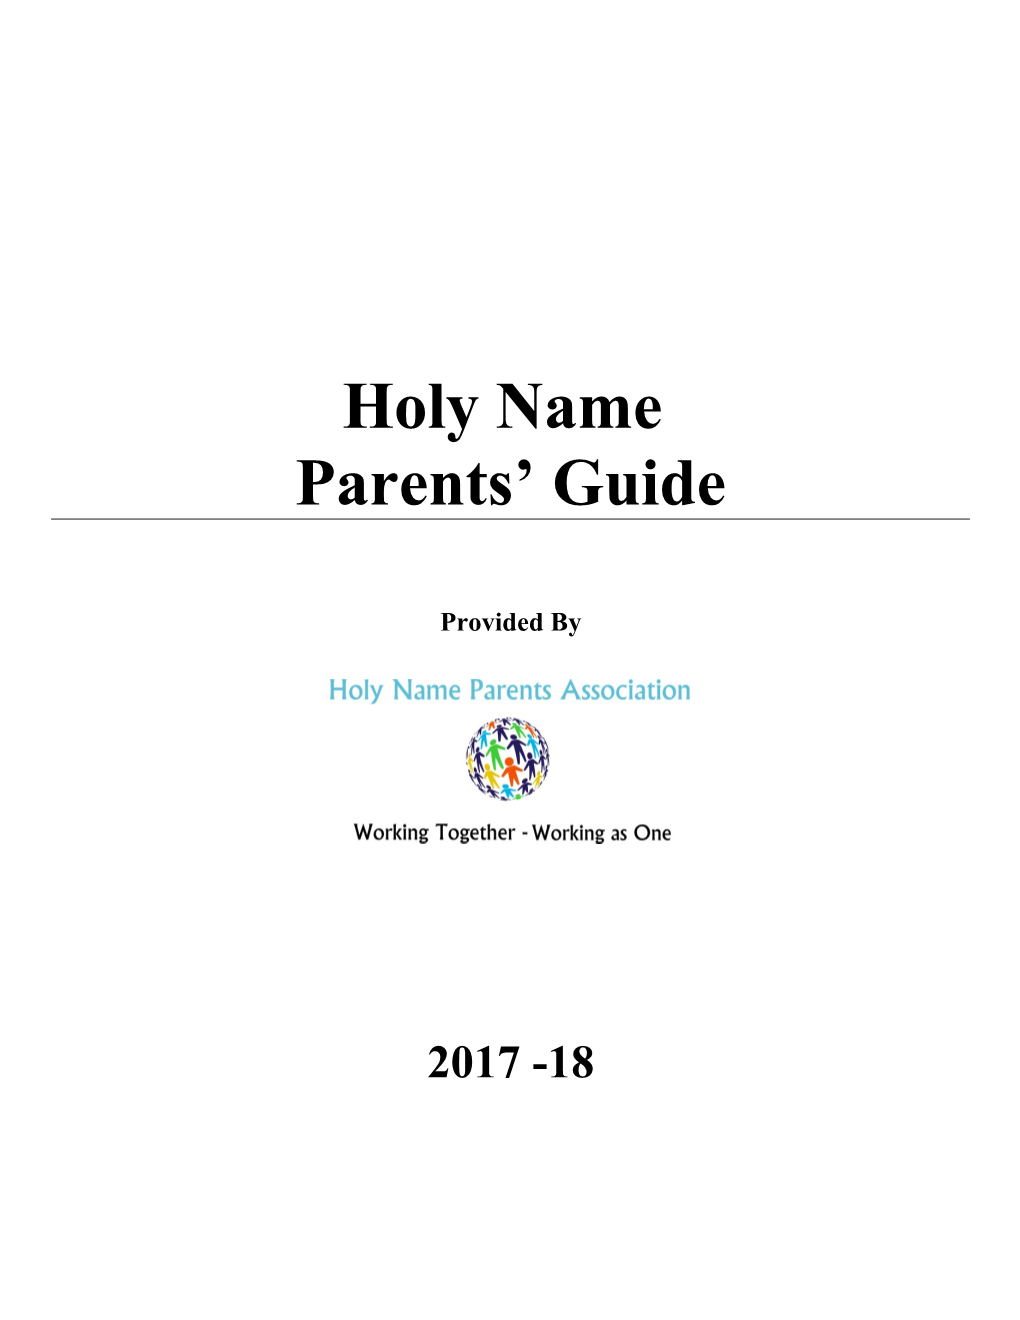 Holy Name Parents Association Guide